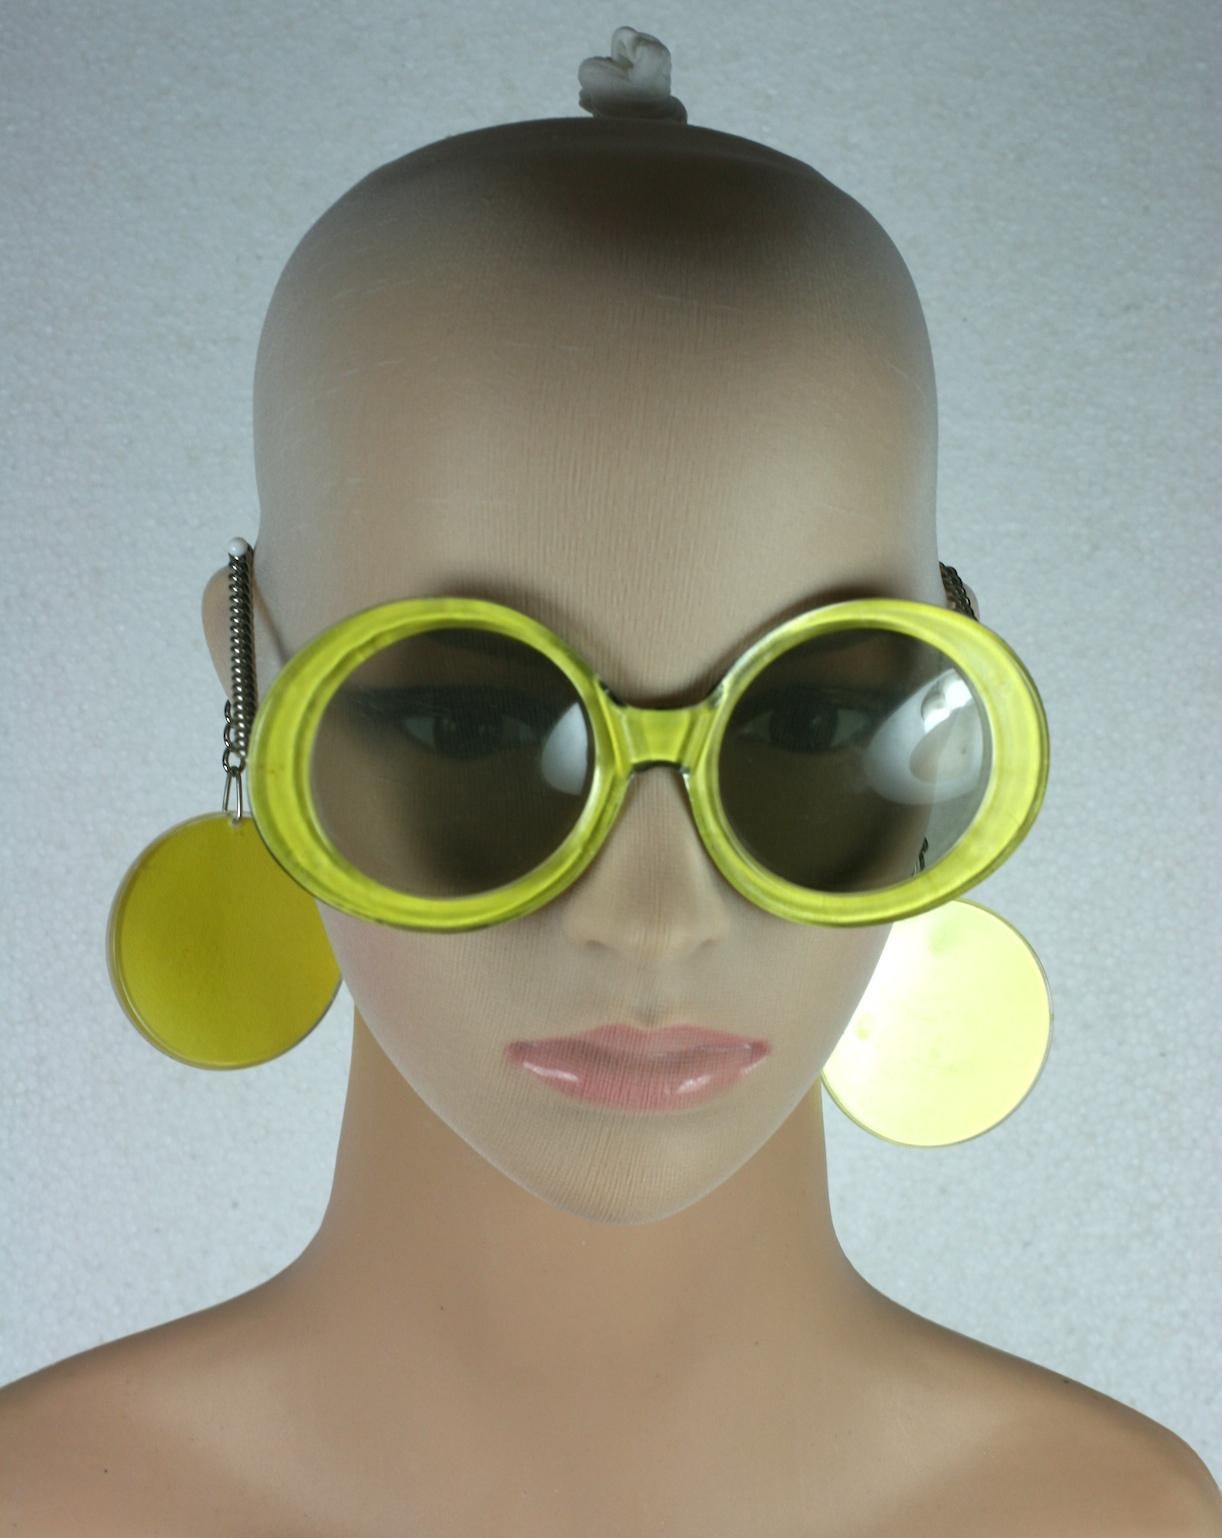 sunglasses with chains instead of arms